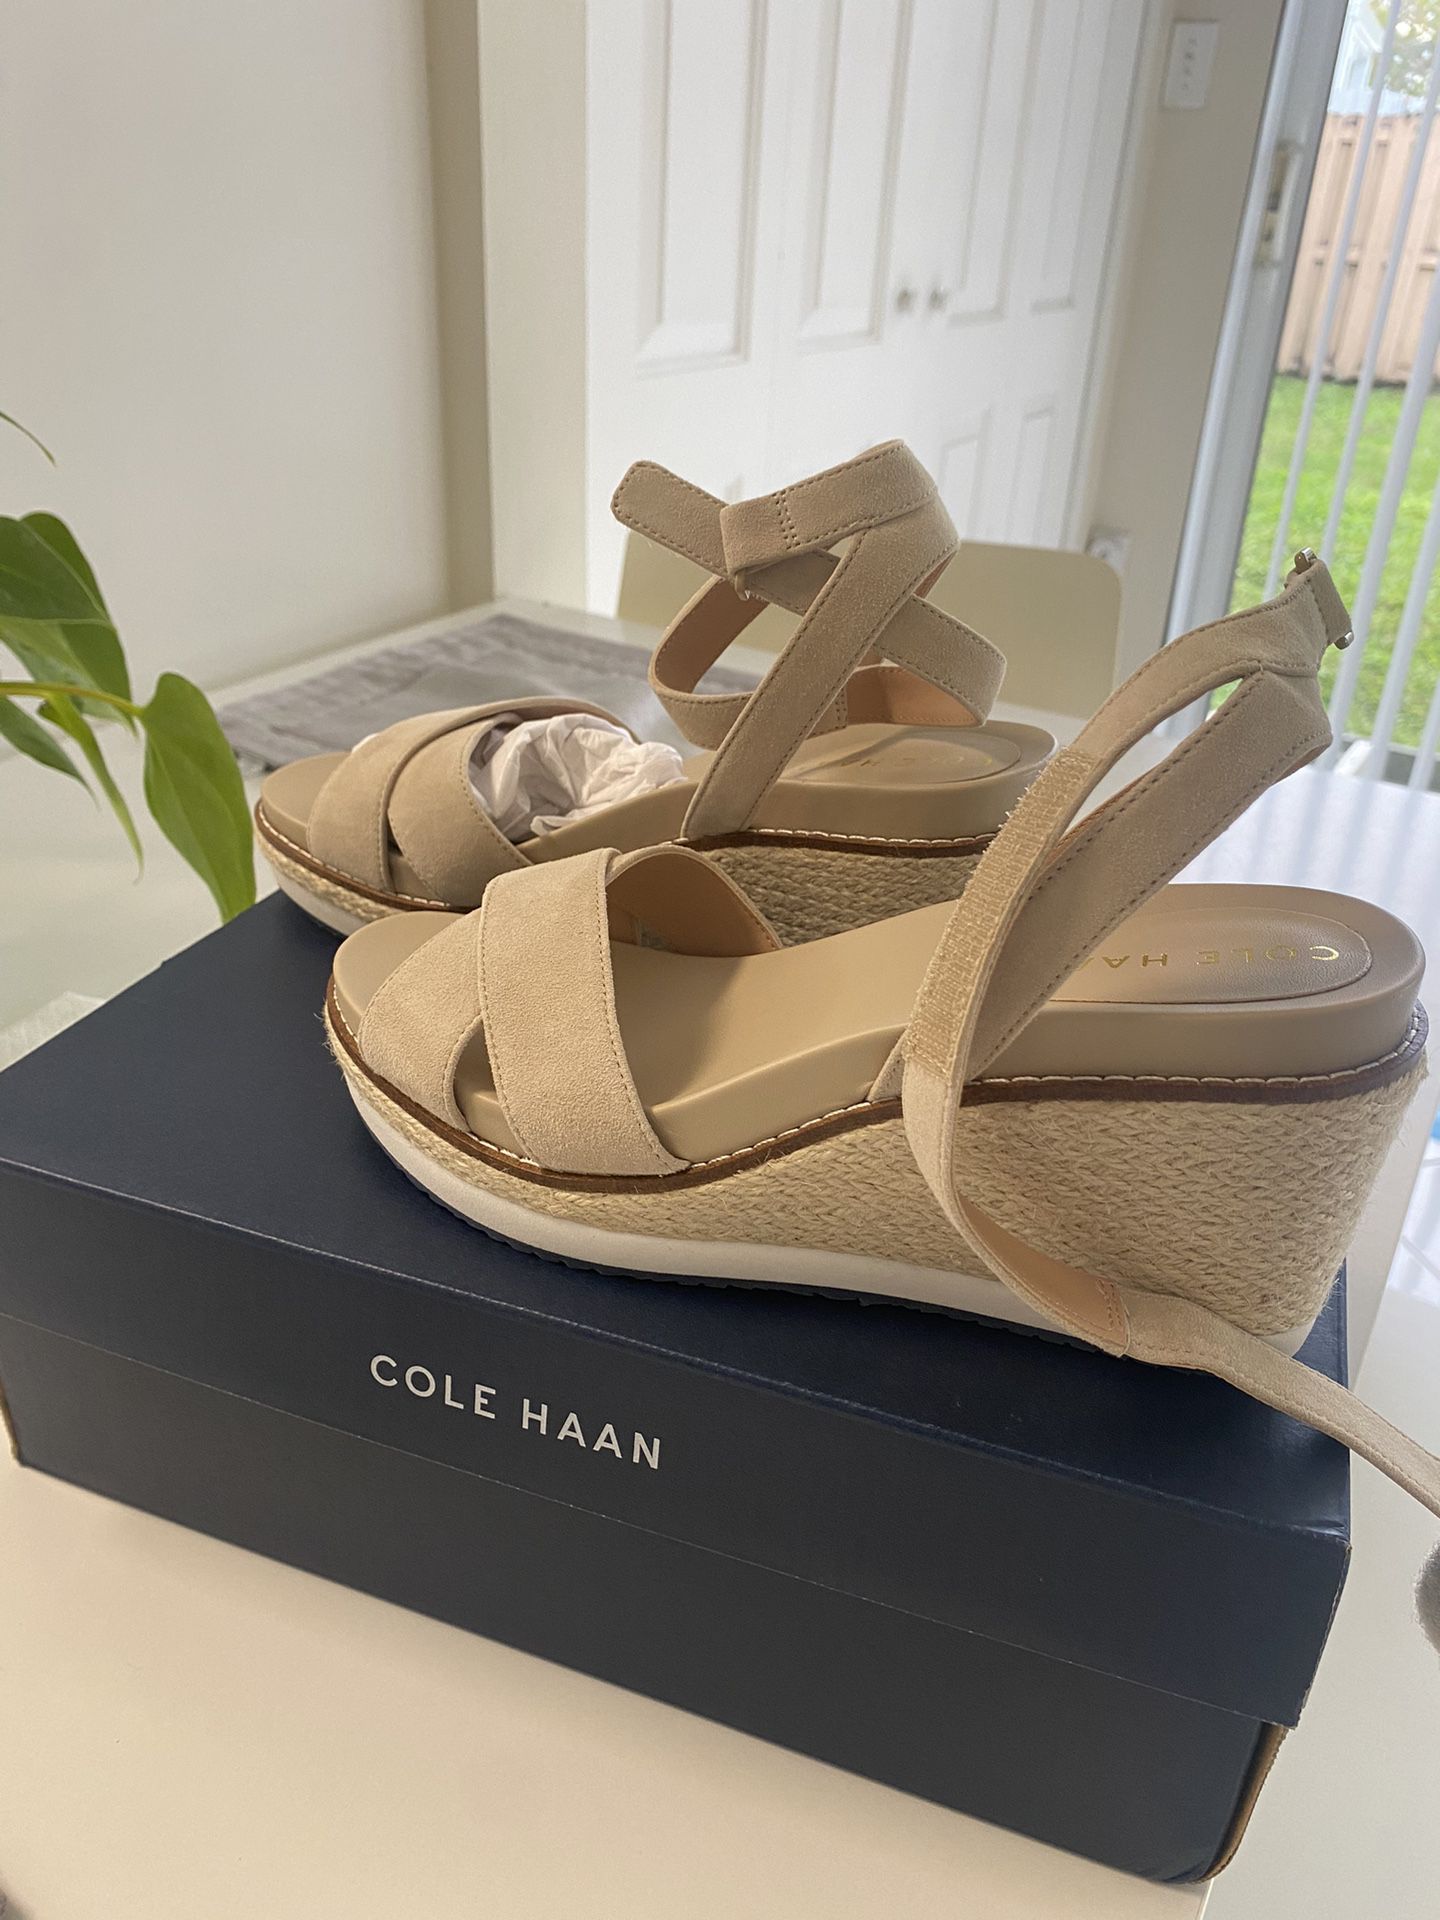 New Cole Haan Wedge Size 6